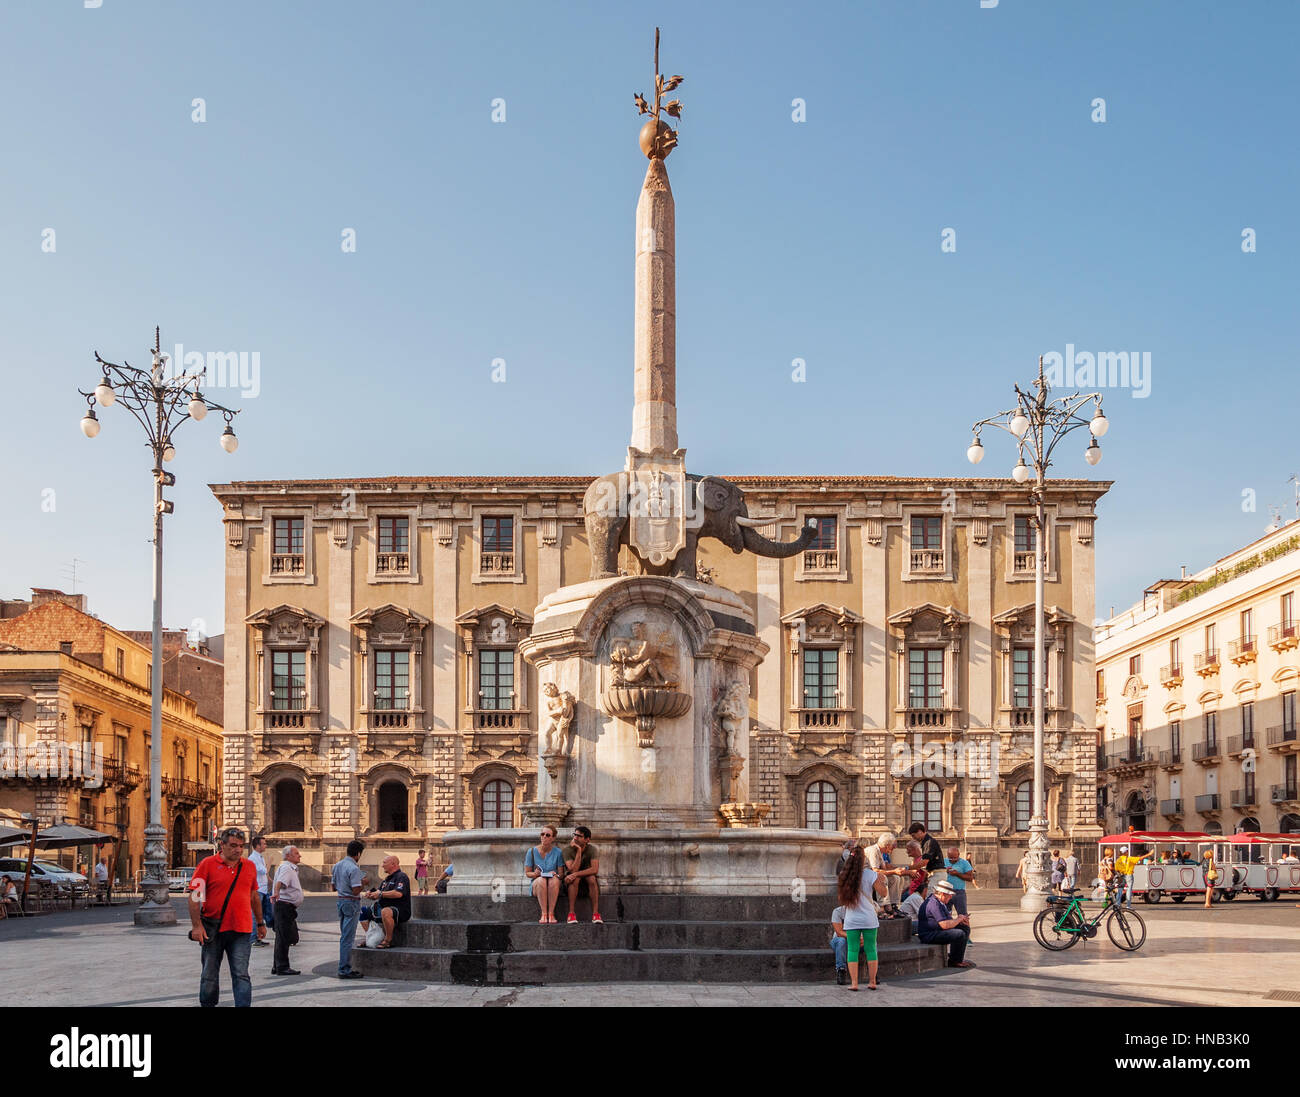 CATANIA, ITALY - SEPTEMBER 13, 2015: The fountain of Elephant on the Cathedral Square in Catania, Sicily, Italy Stock Photo